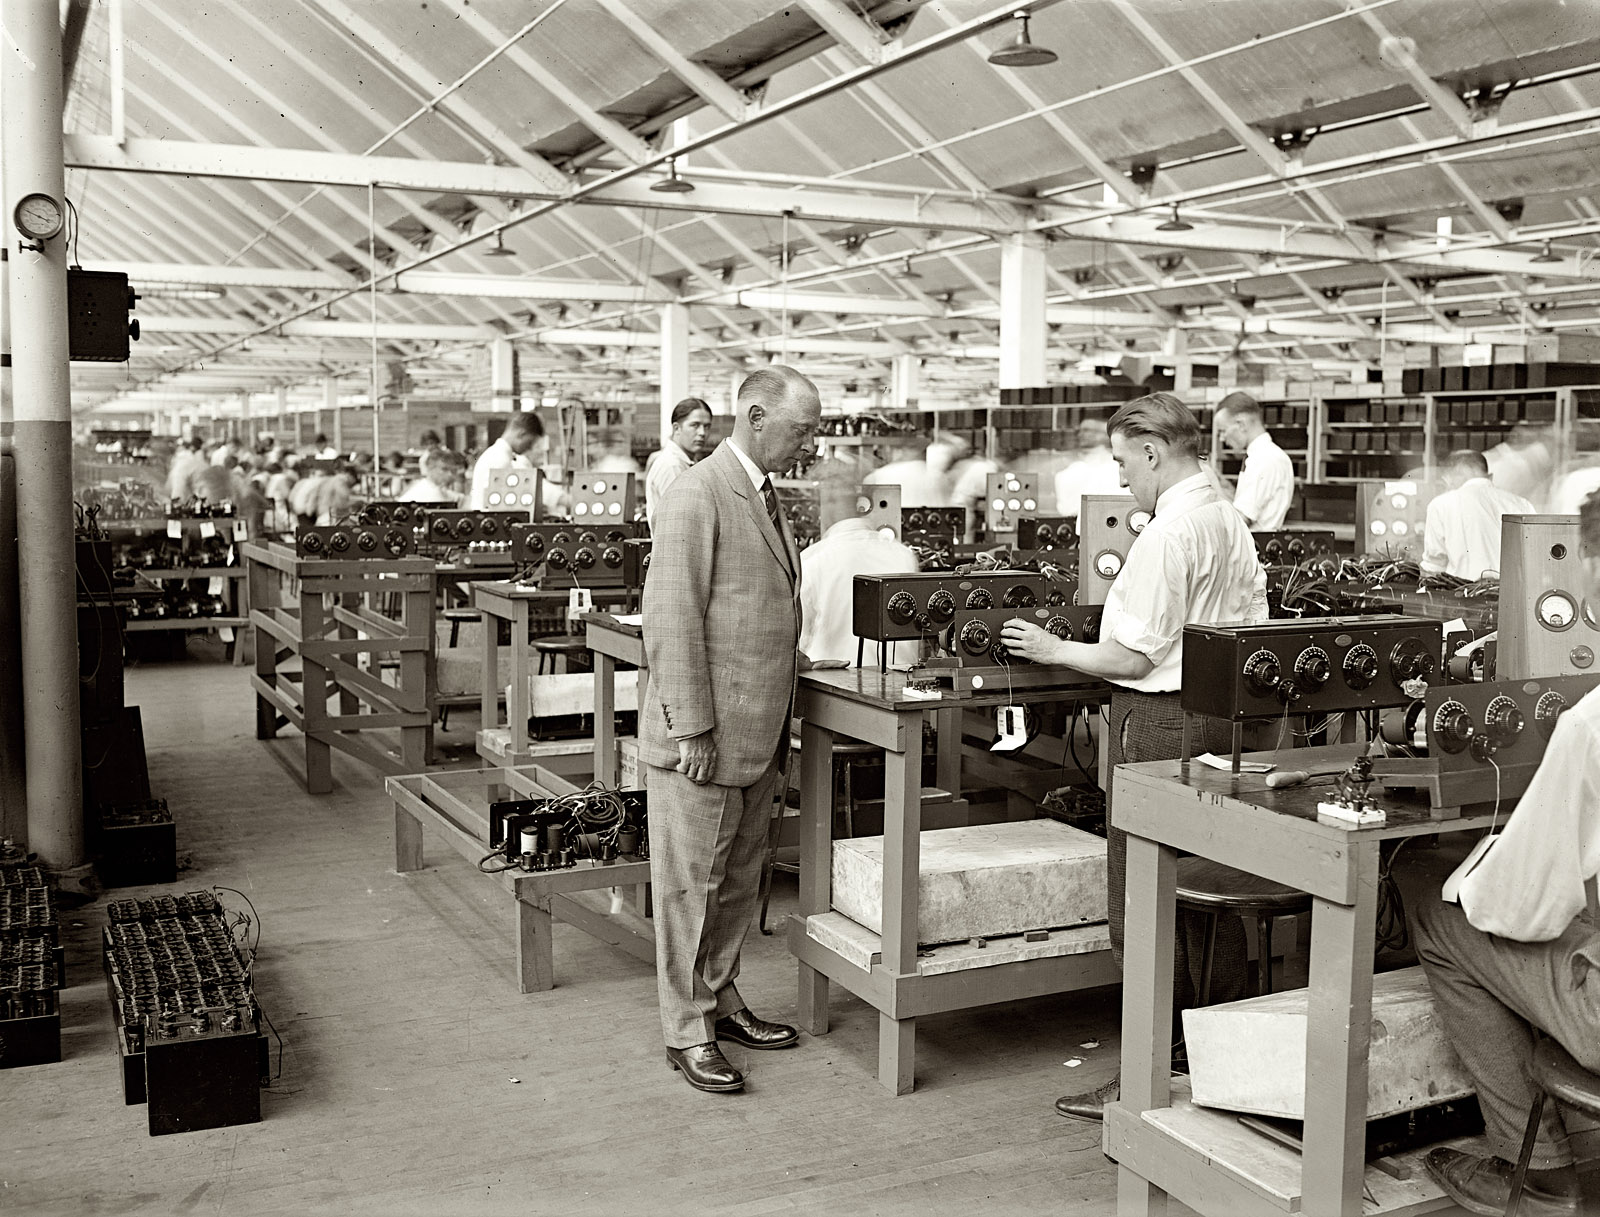 1925. "Atwater Kent at test table." Namesake of the Atwater Kent radio empire at his Philadelphia factory. View full size. National Photo Company Collection.